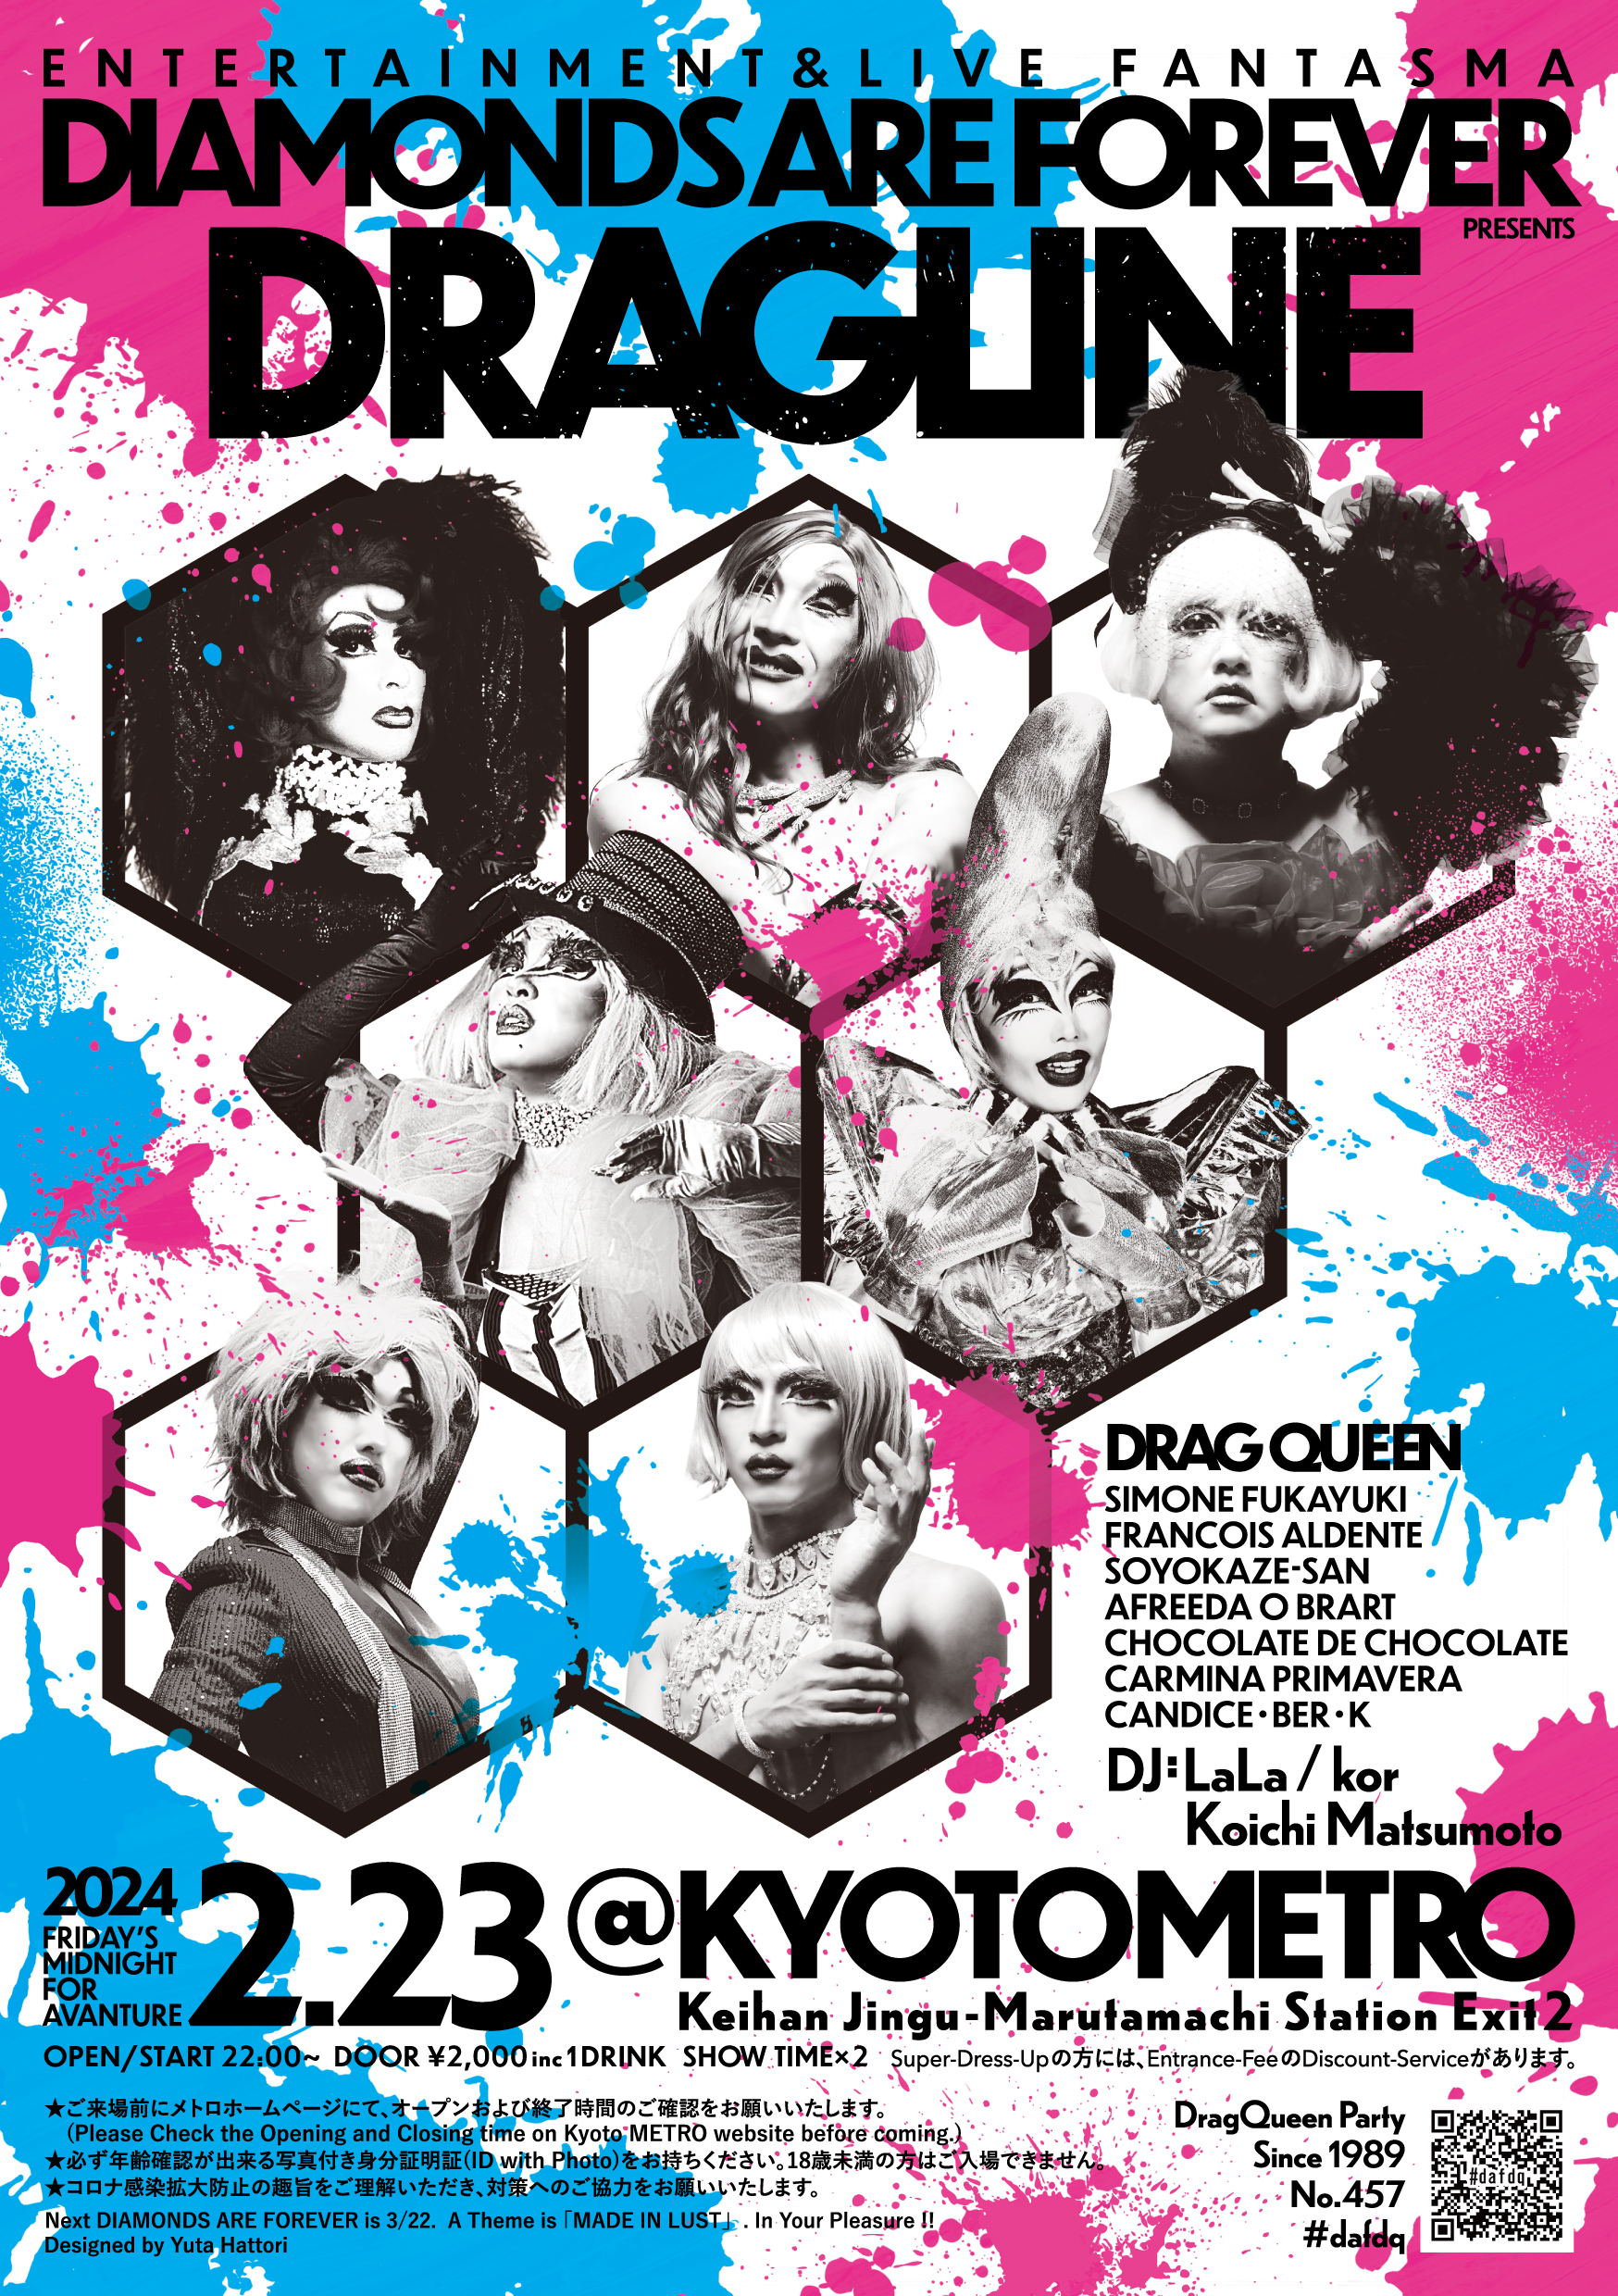 DIAMONDS ARE FOREVER presents “DRAG LINE” | CLUB METRO | 京都メトロ